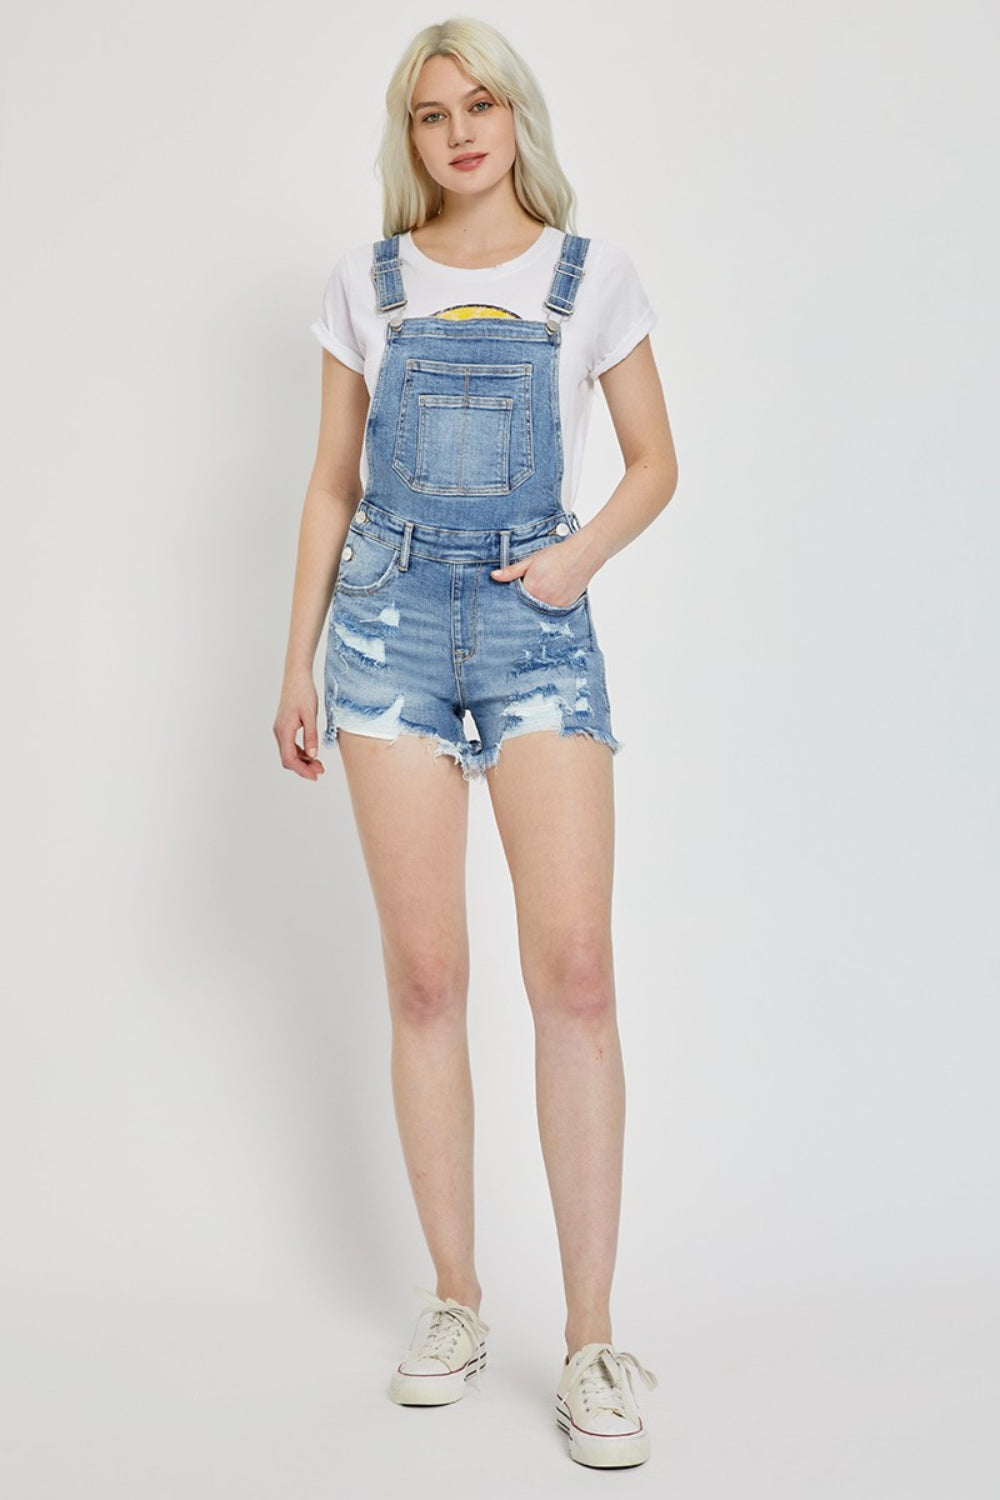 a woman in a white t - shirt and denim overalls